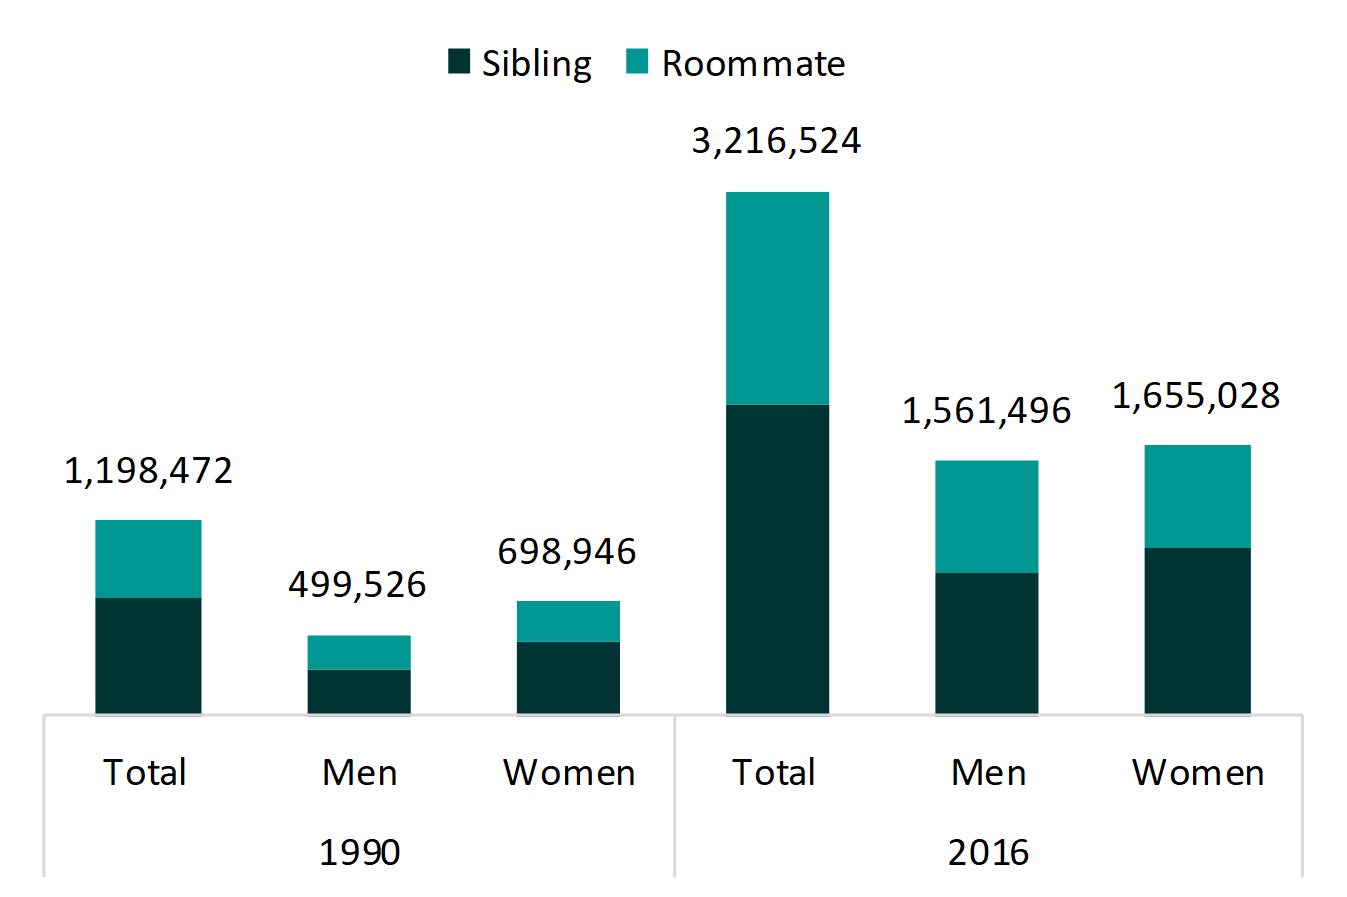 bar chart in shades of teal showing Figure 1. Older Adults Living with a Sibling or Roommate, 1990 & 2016